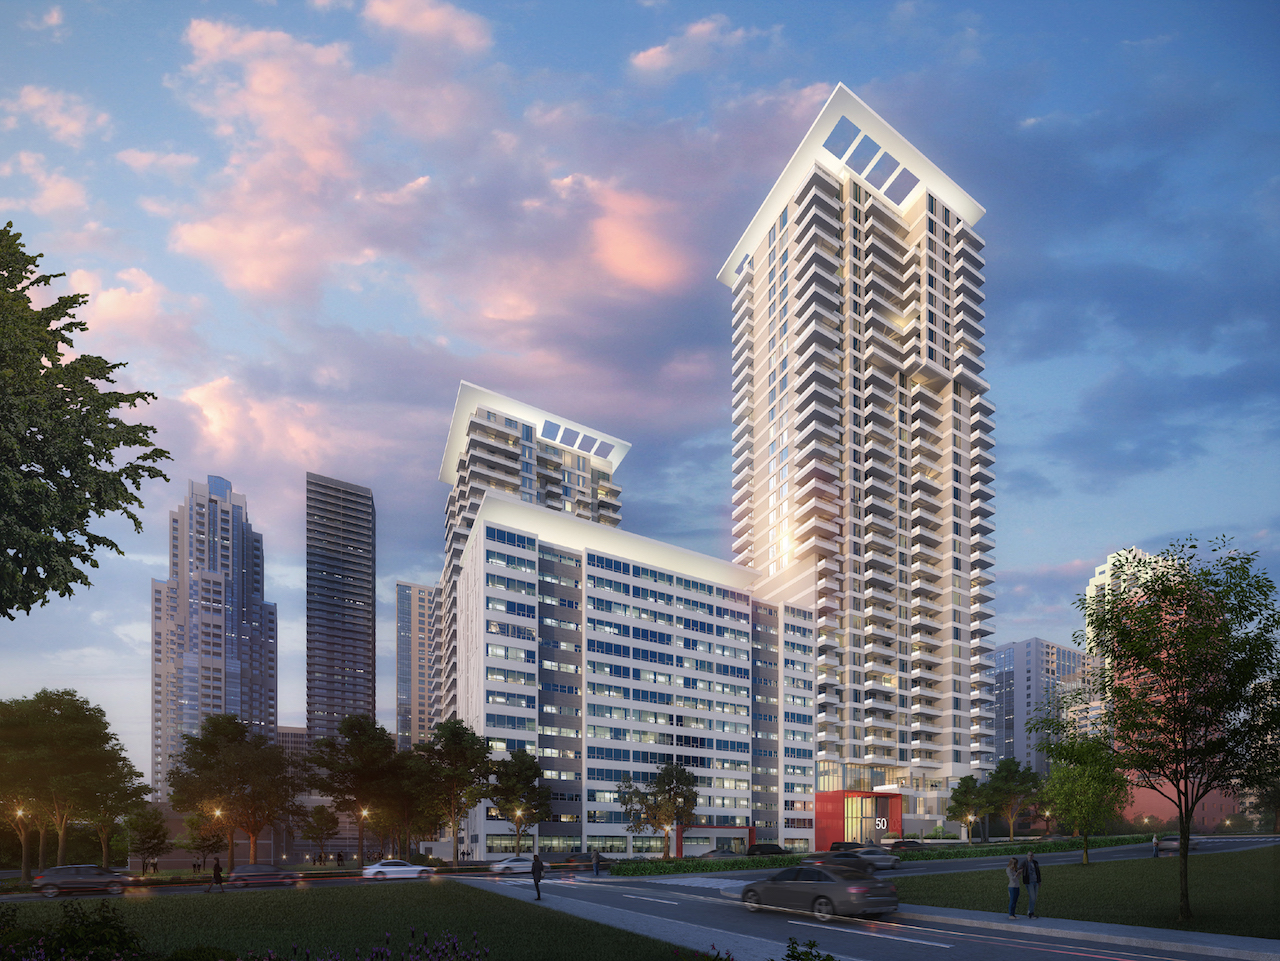 Rendering of Plaza Midtown Condos exterior in the evening.